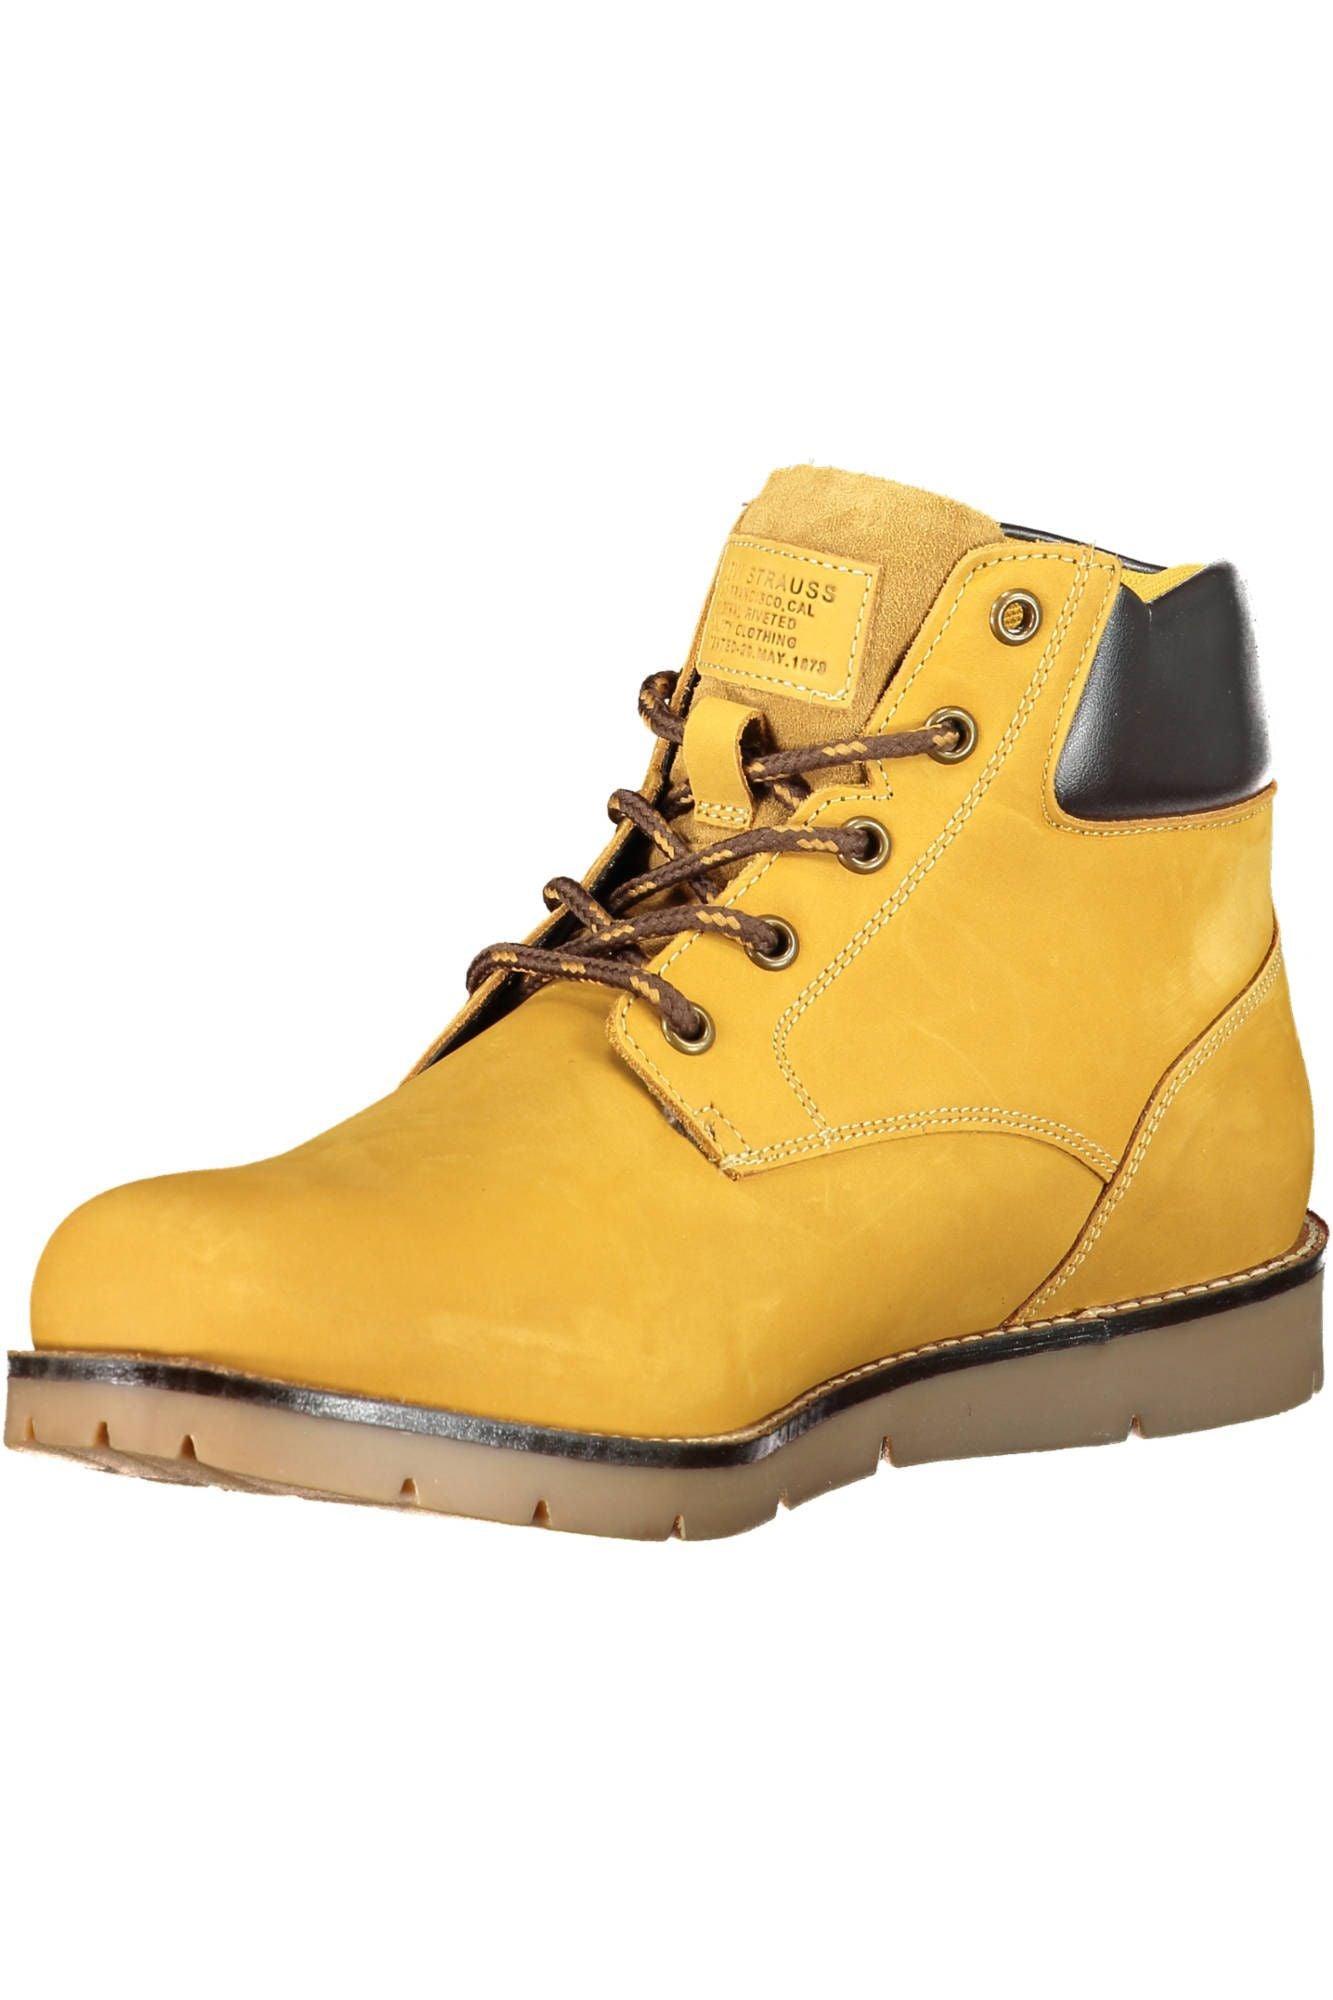 Levi's Sunset Yellow Ankle Boots with Lace-Up Detail - PER.FASHION